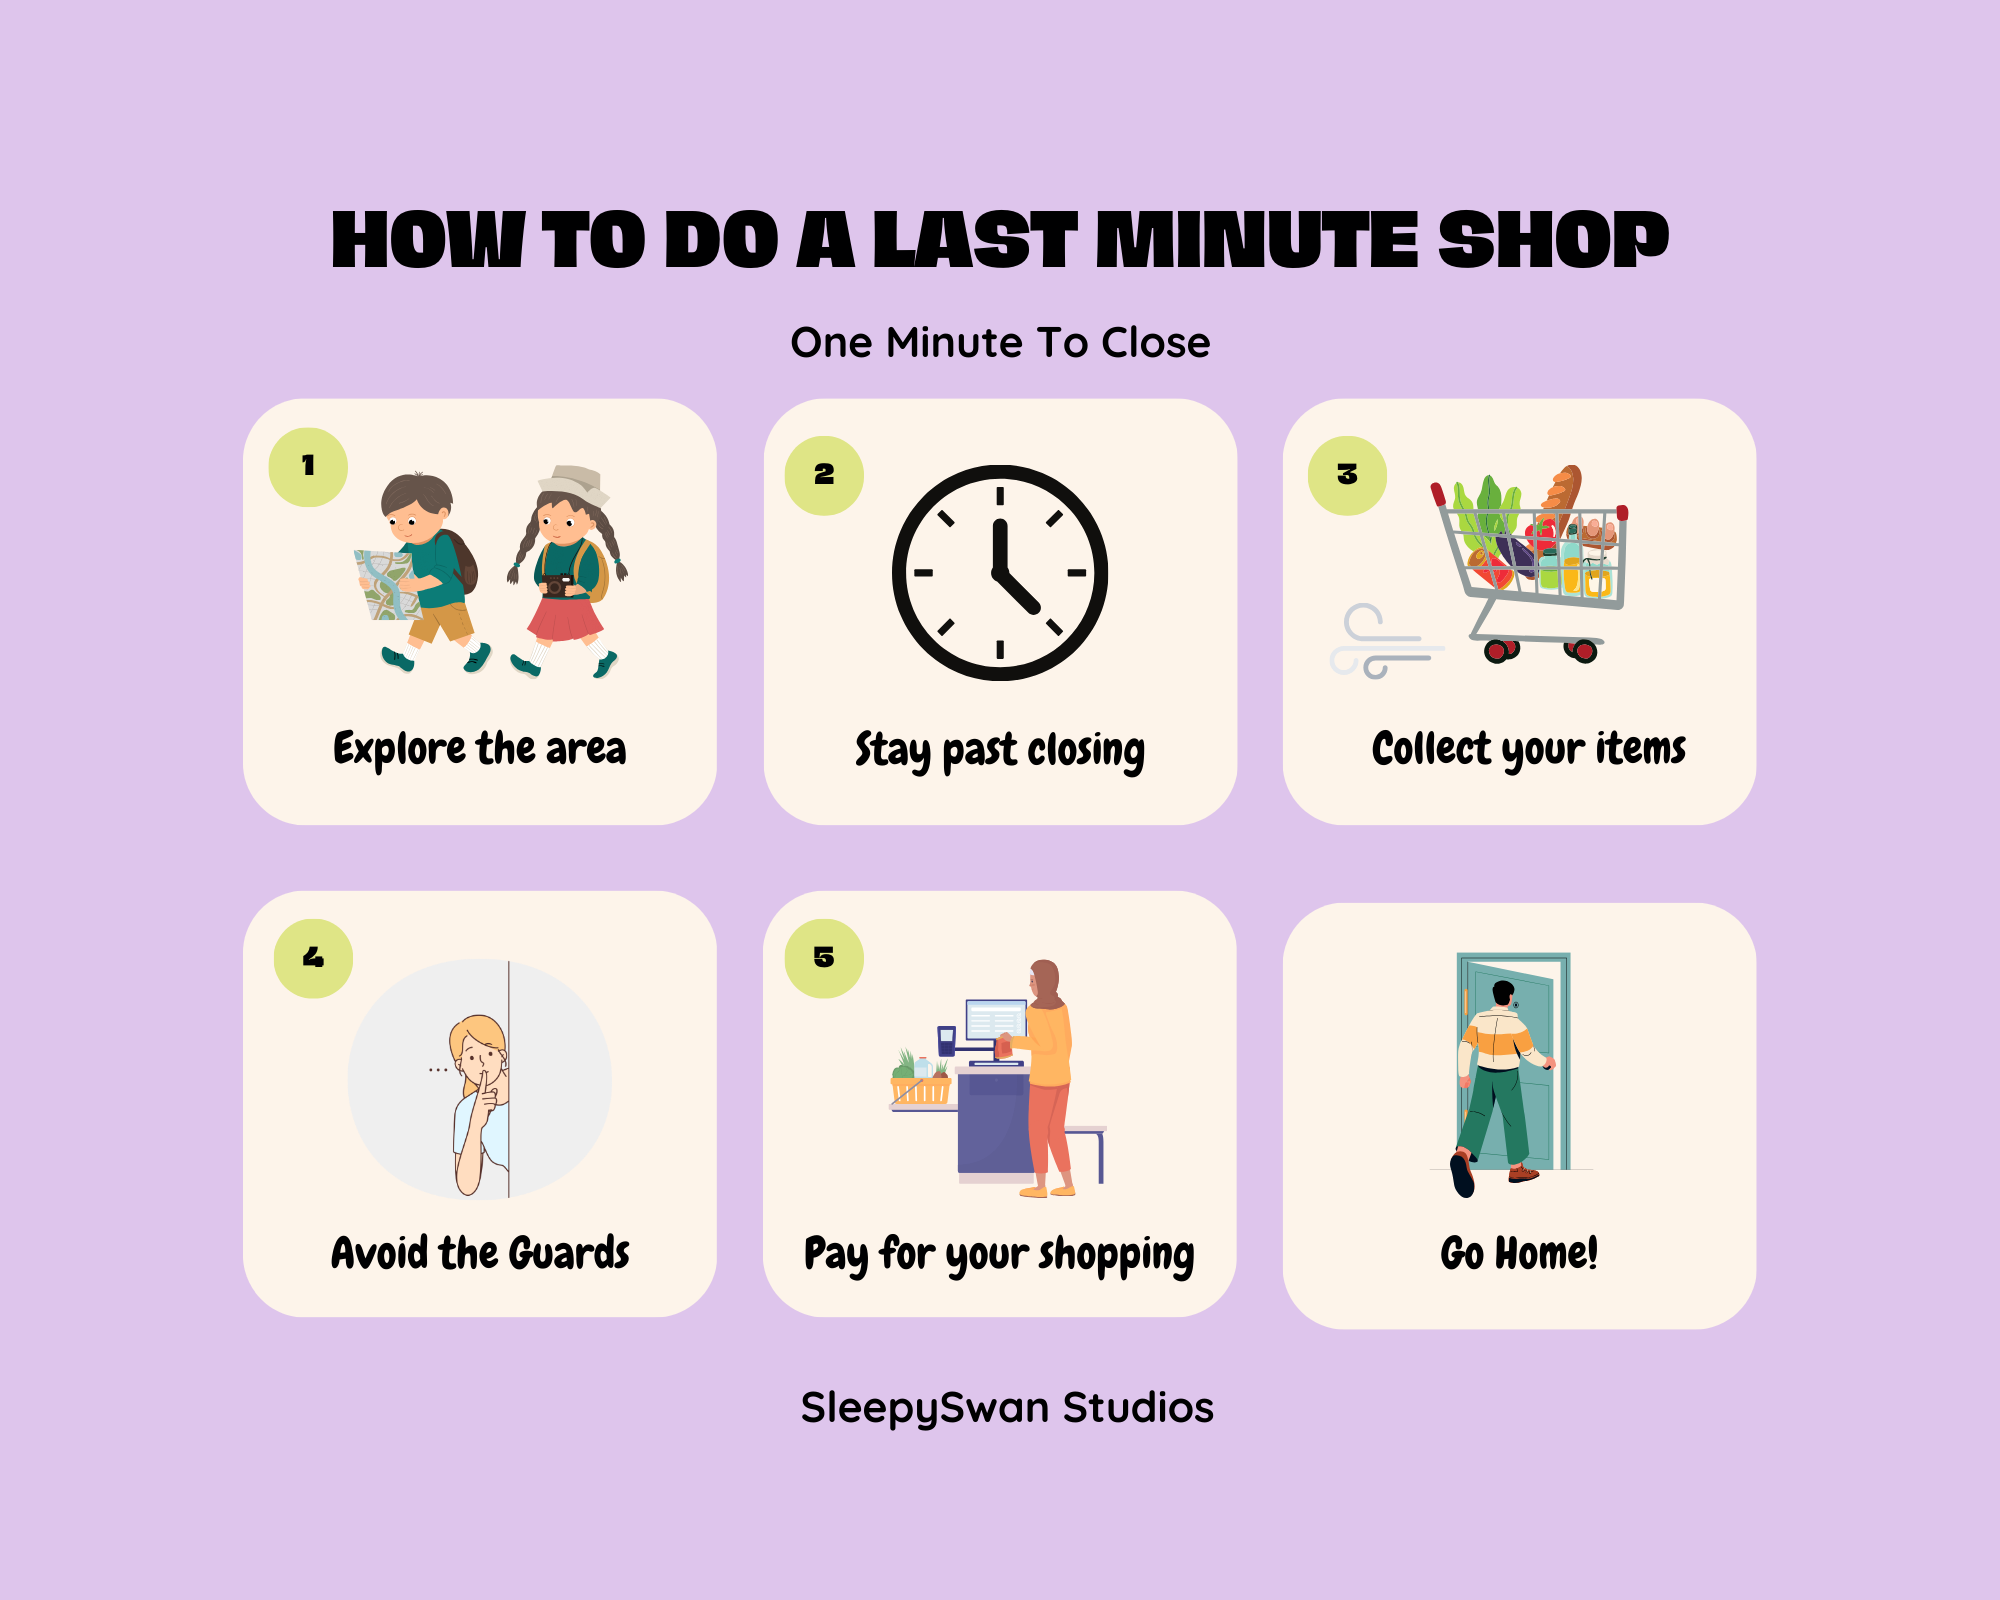 How to do a last Minute Shop